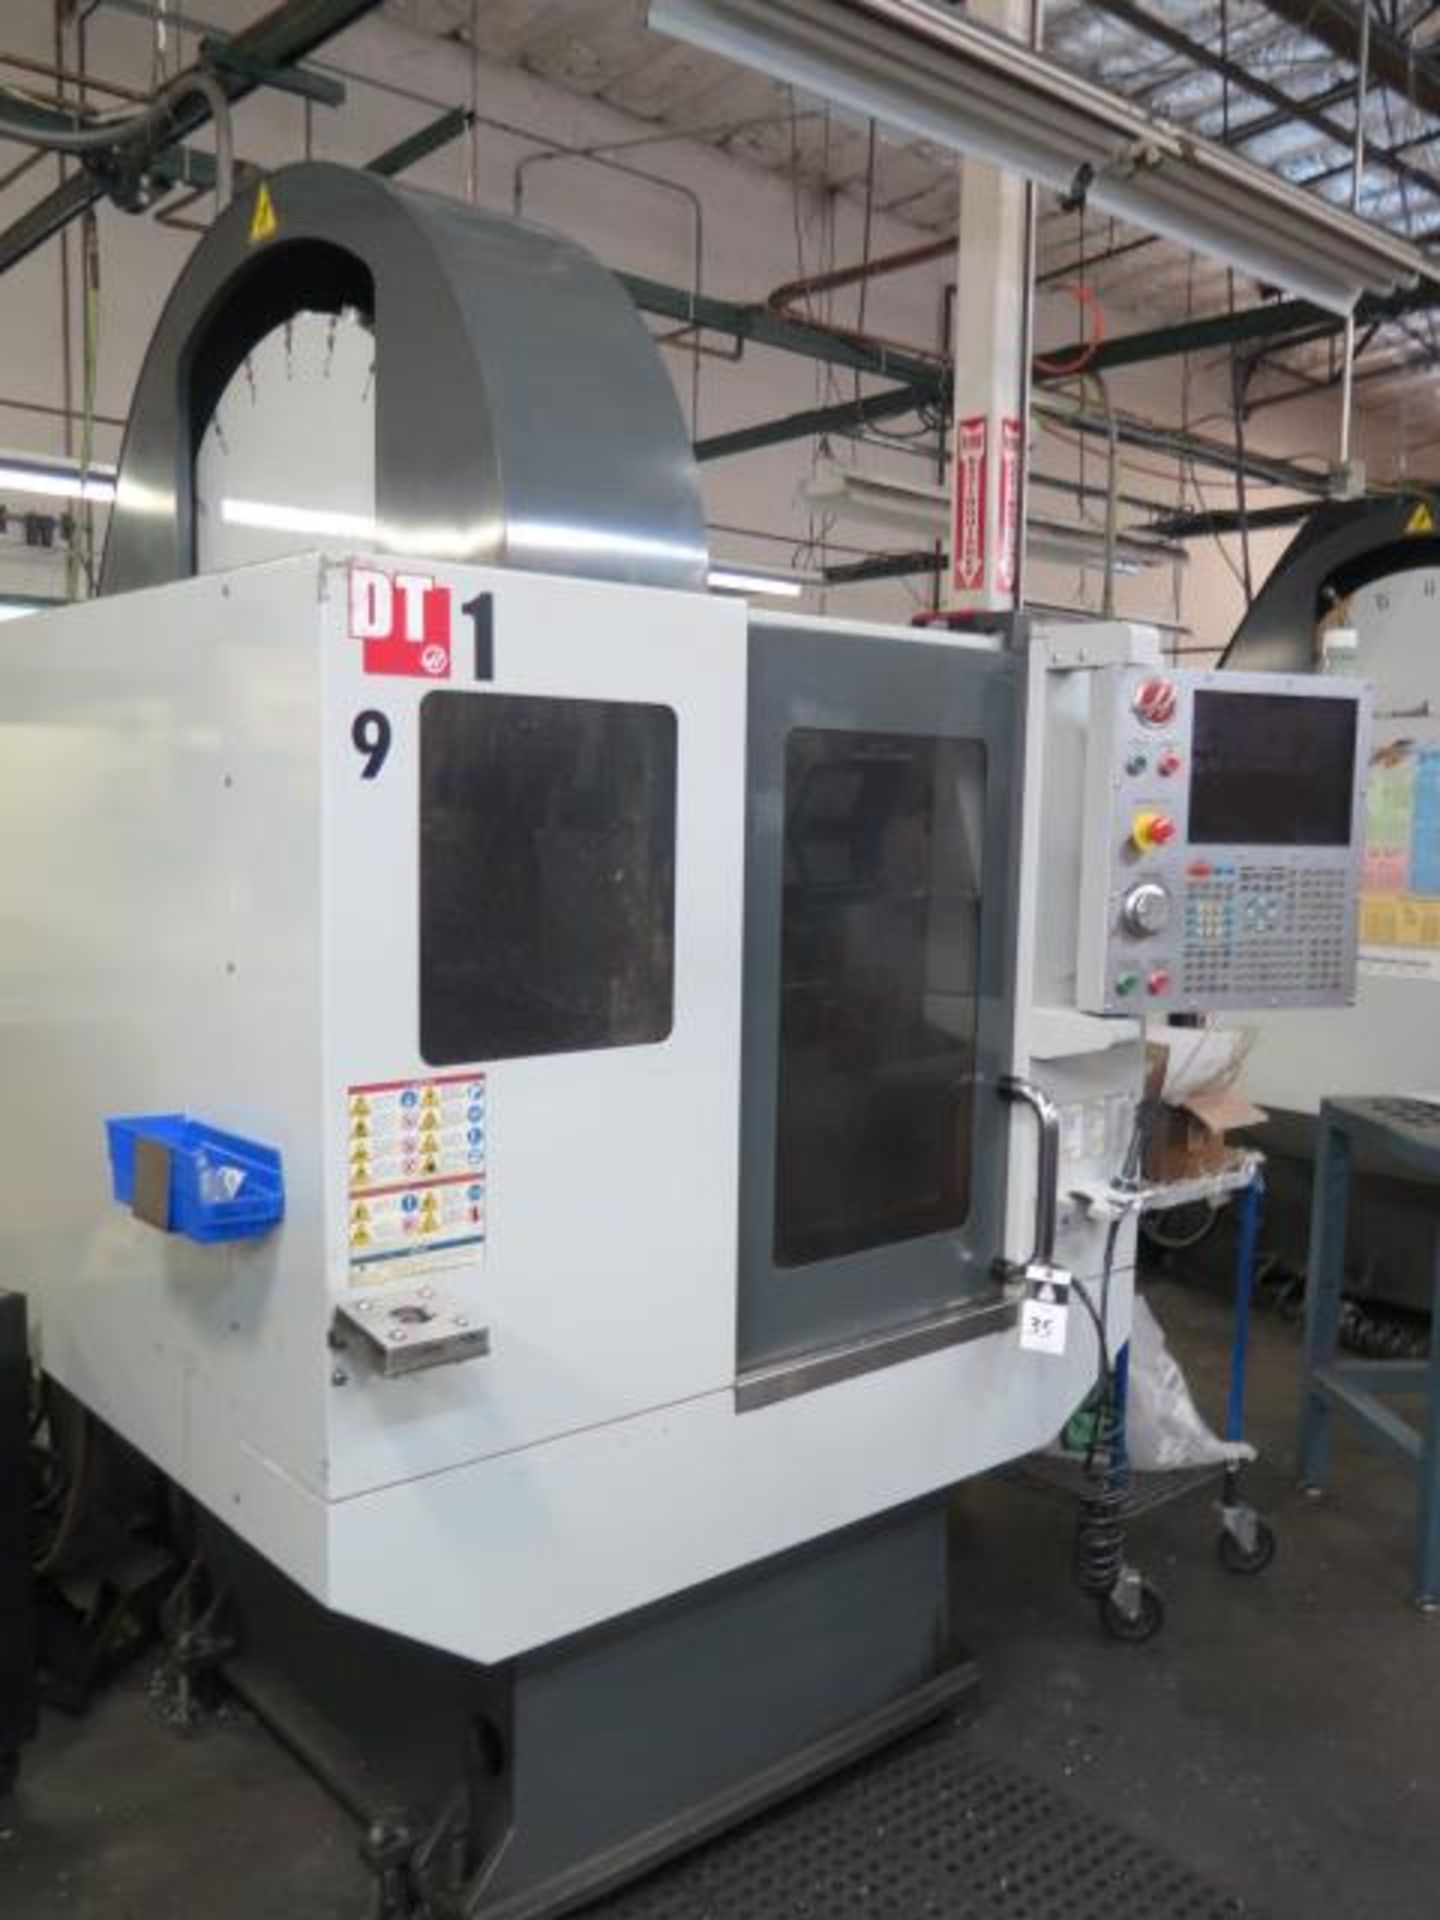 2012 Haas DT-1 4-Axis CNC VMC s/n 1093529 w/ Haas Controls, 20-Station ATC, SOLD AS IS - Image 3 of 13